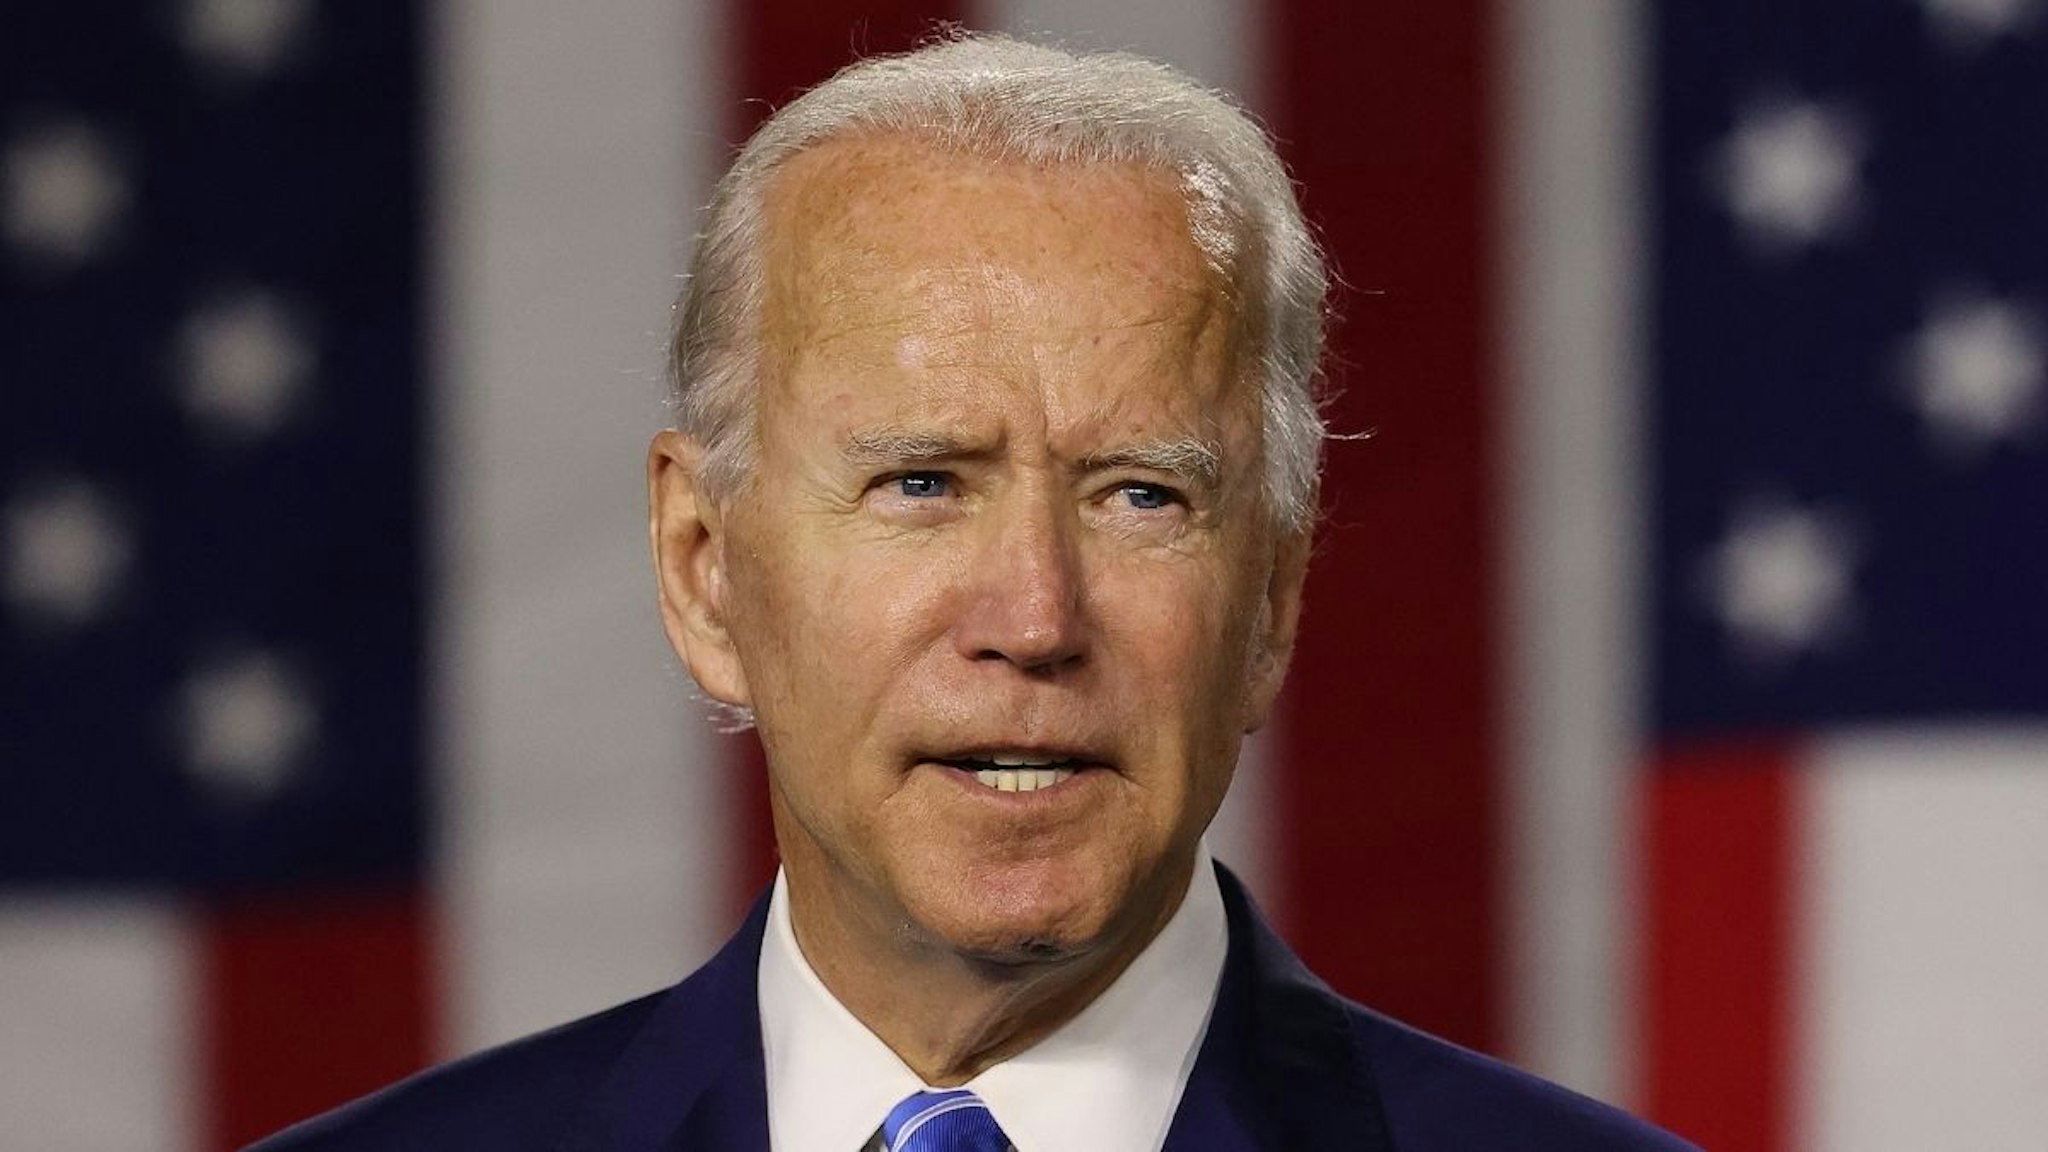 Democratic presidential candidate former Vice President Joe Biden speaks at the Chase Center July 14, 2020 in Wilmington, Delaware.